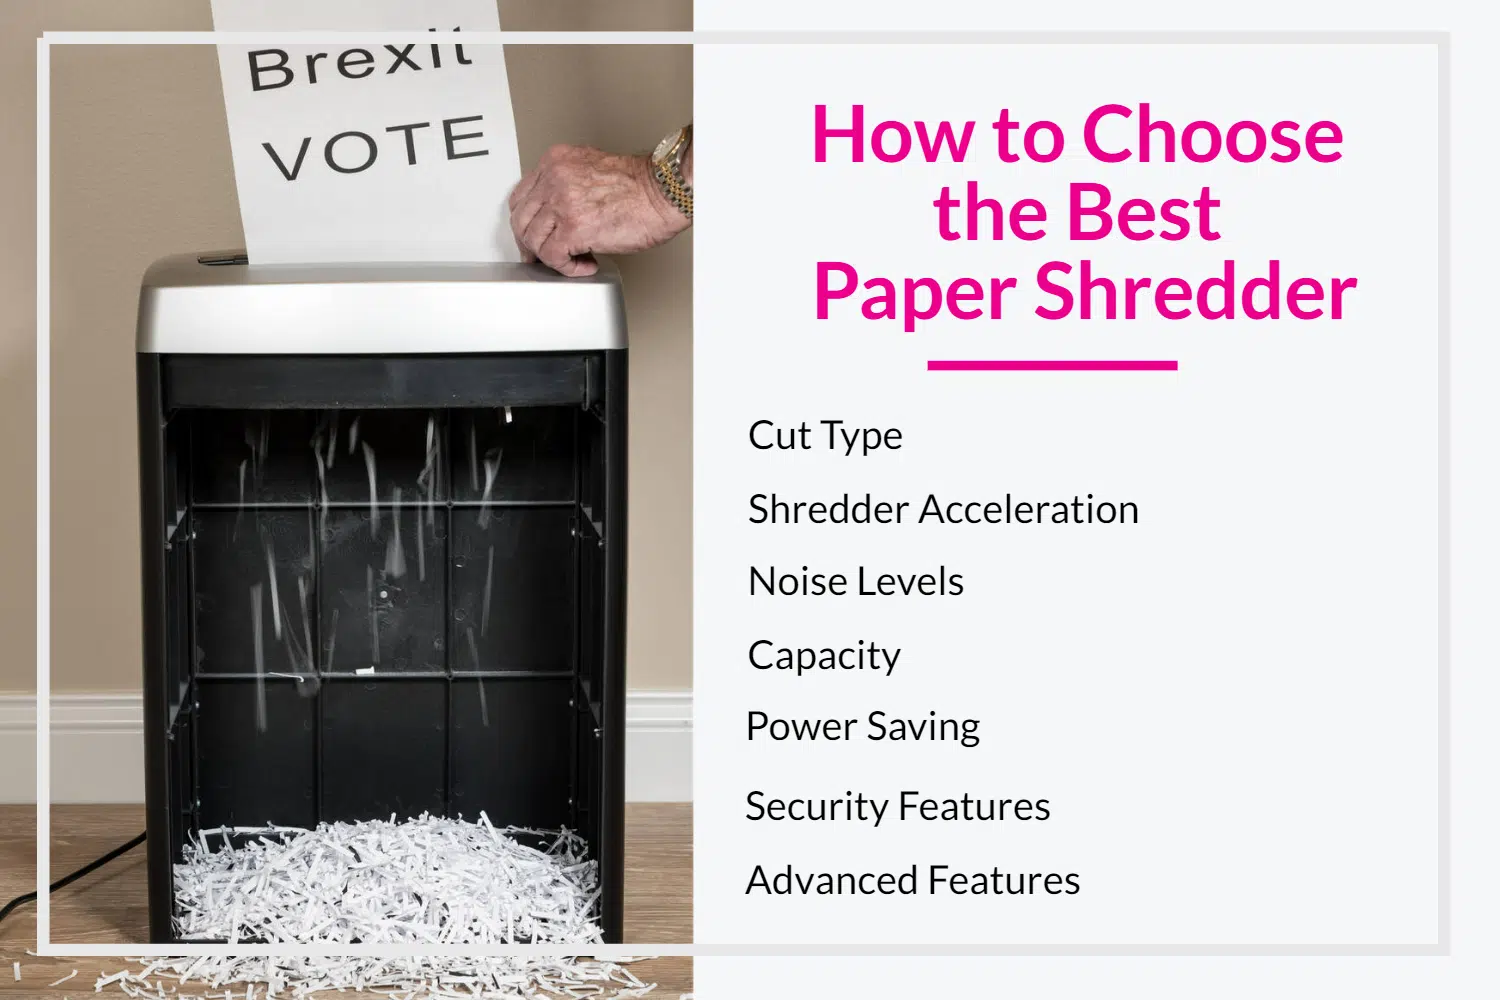 How to Choose the Best Paper Shredder